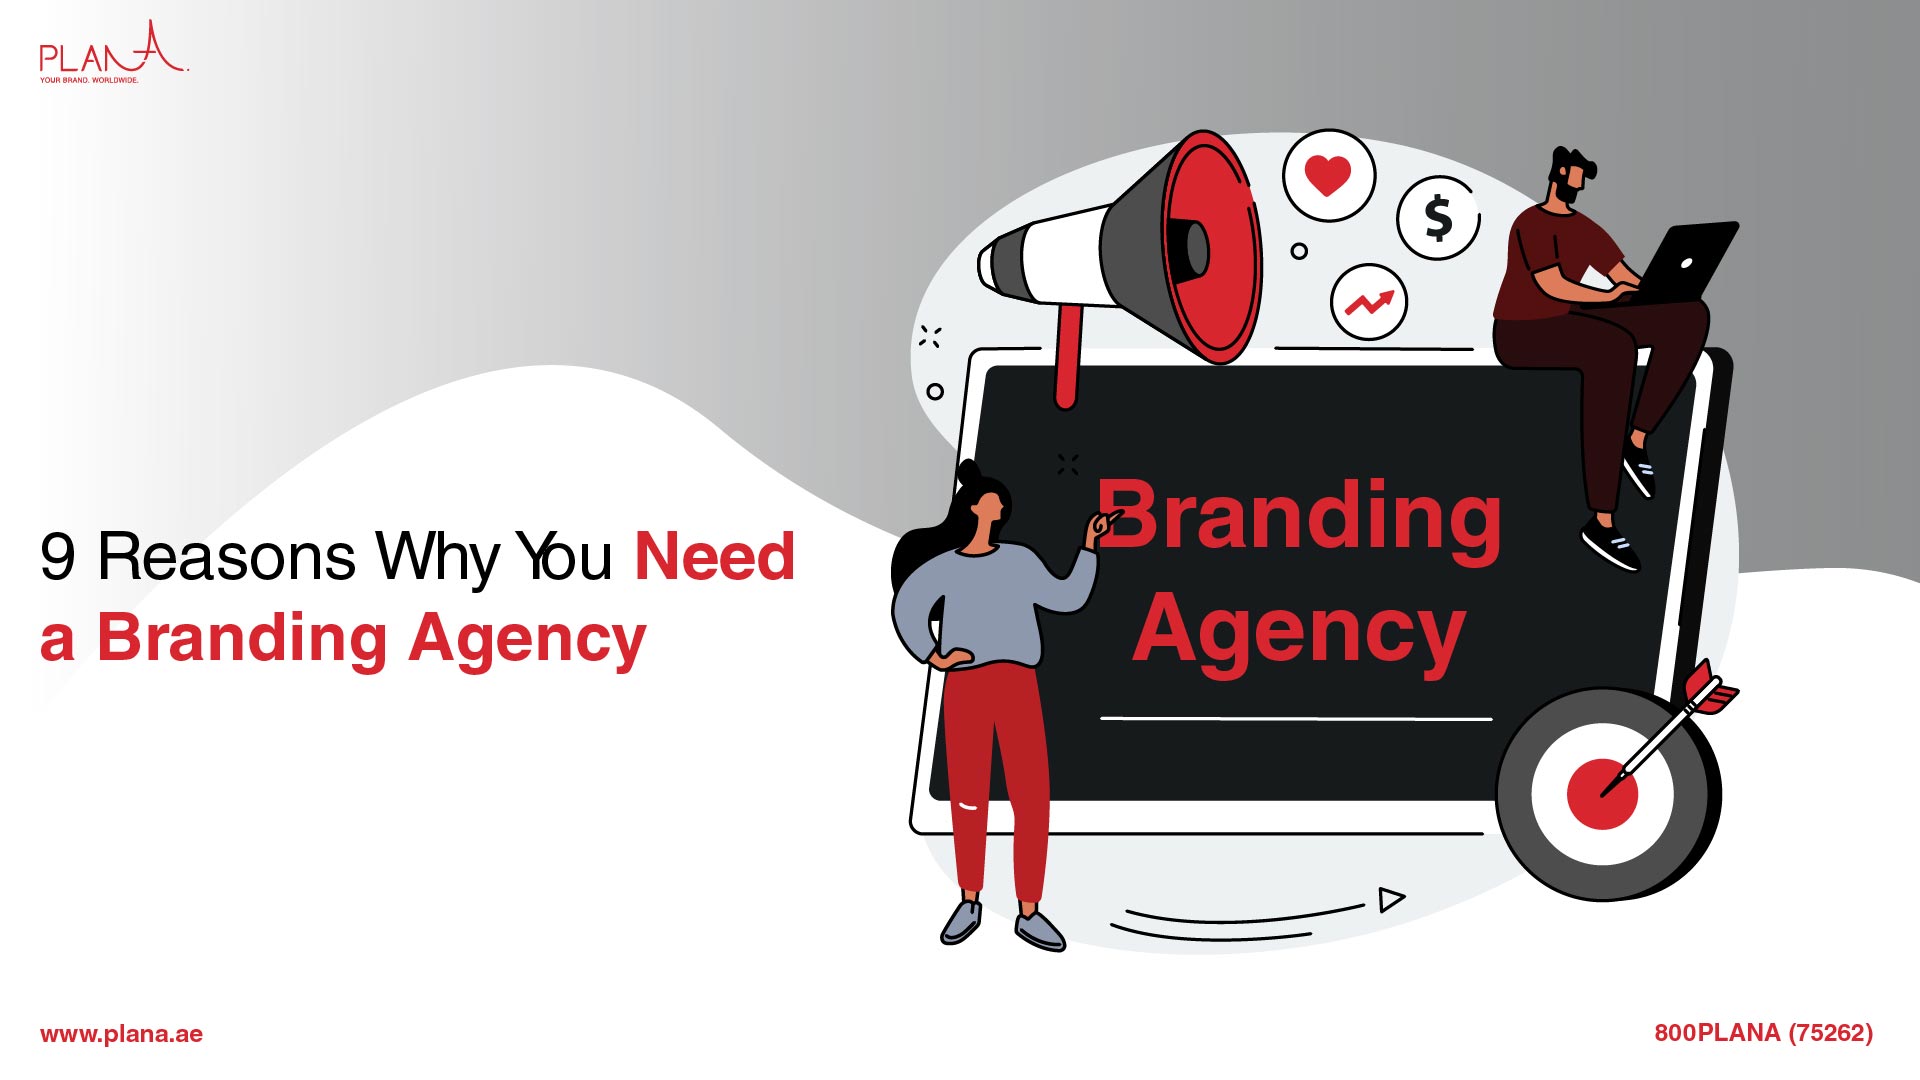 9 Reasons Why You Need a Branding Agency